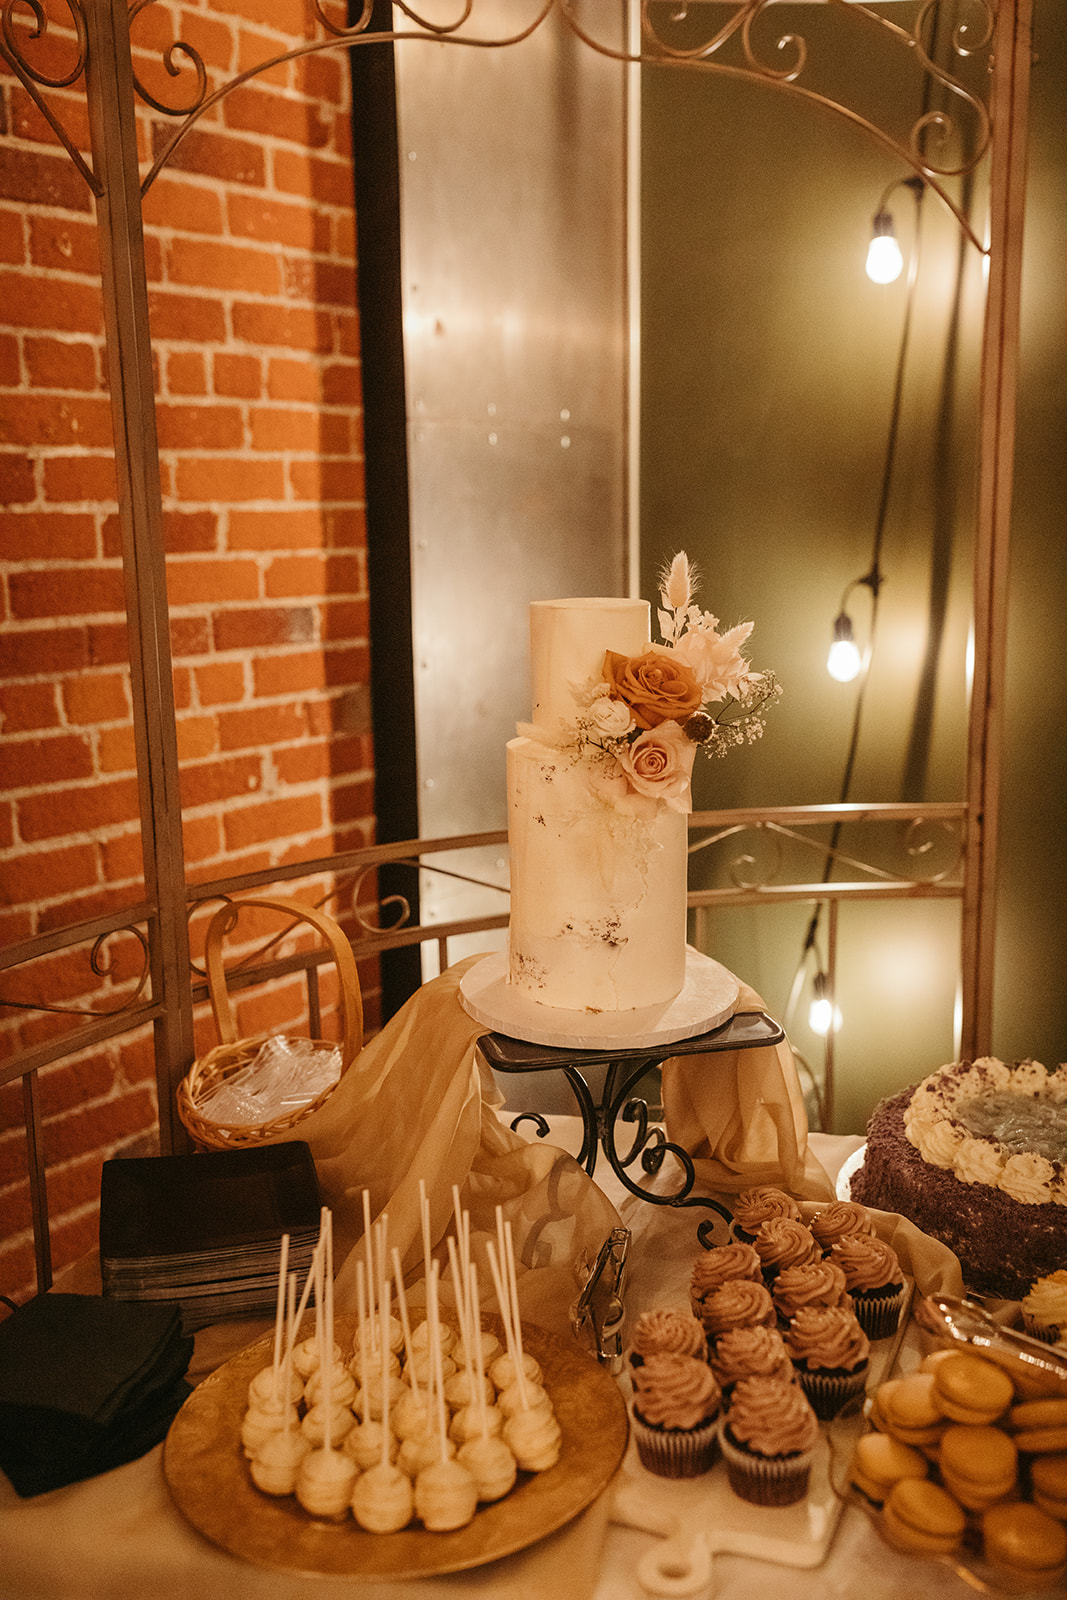 Wedding dessert table with cake, cupakes, macarons and more, uniqued wedding dessert ideas